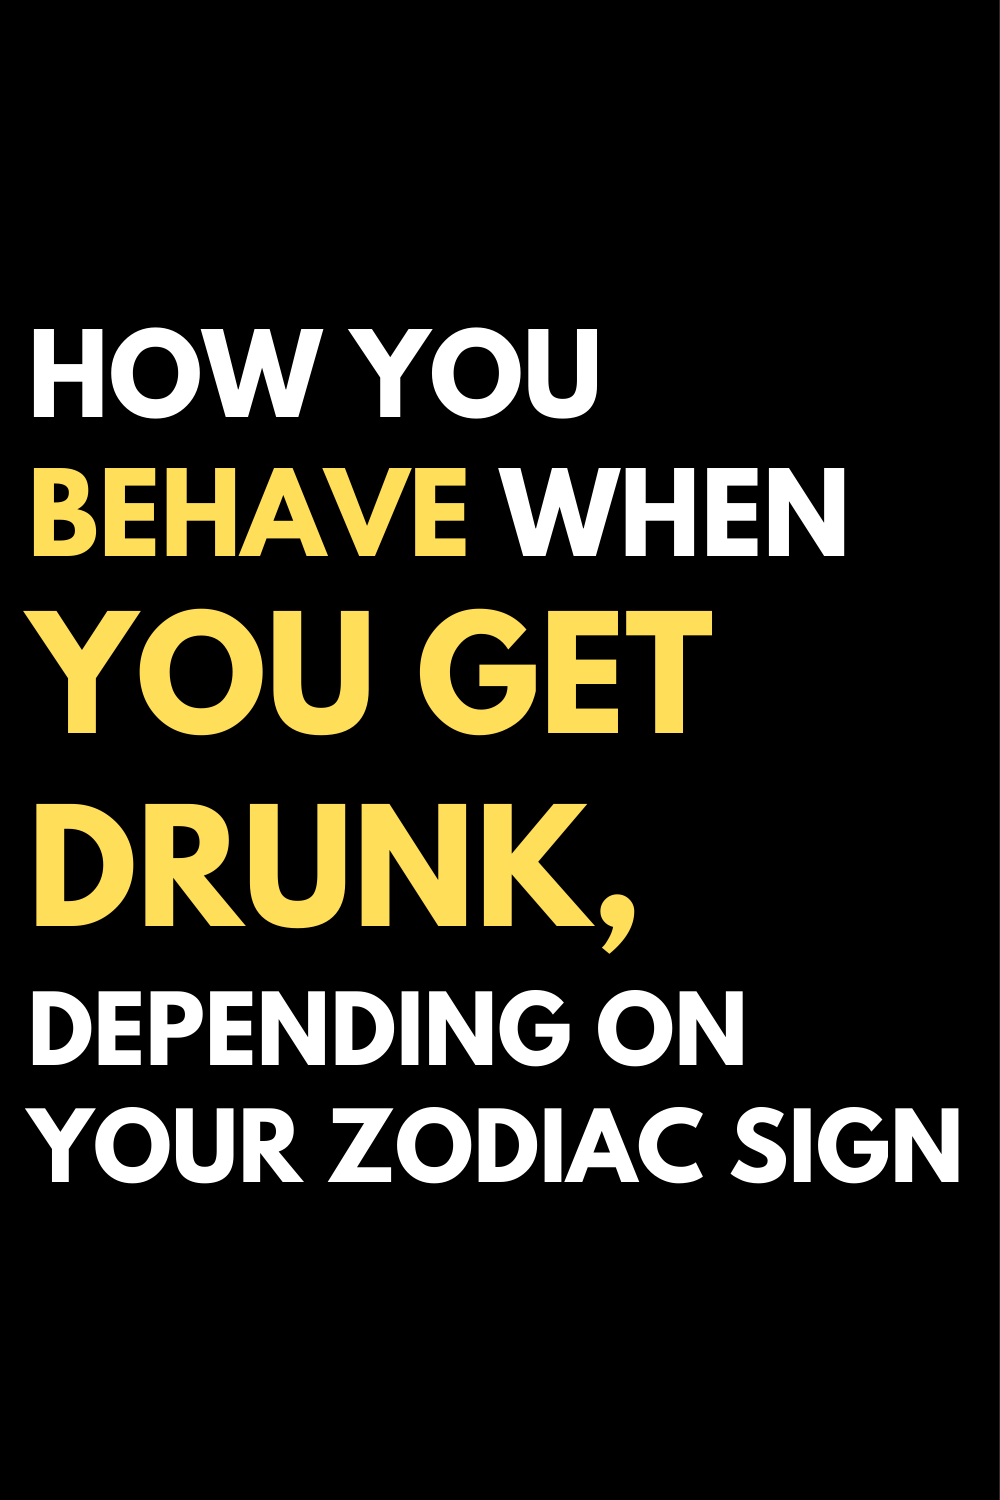 How you behave when you get drunk, depending on your zodiac sign